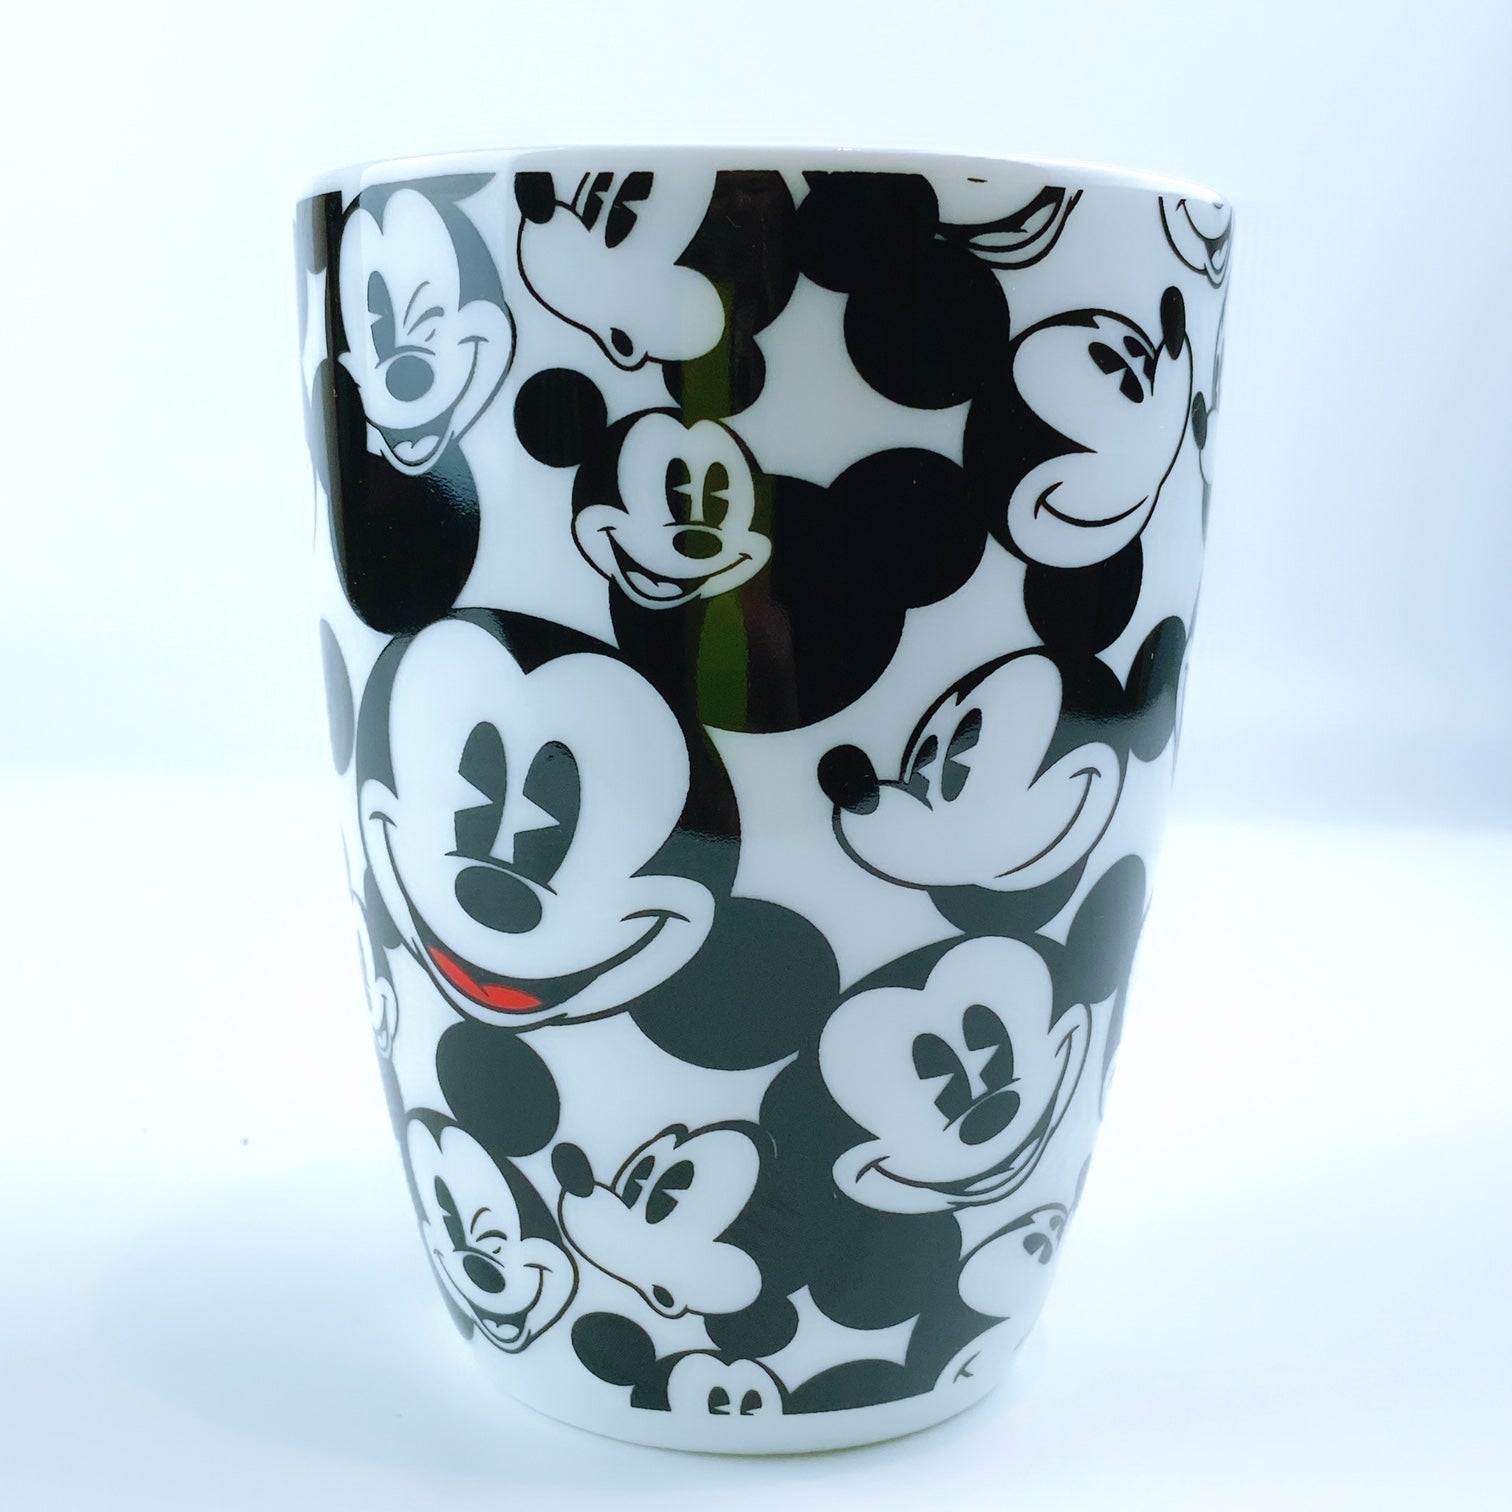 Pair of Classic Disney Mickey Mouse Coffee Mugs - Cup - Black Red